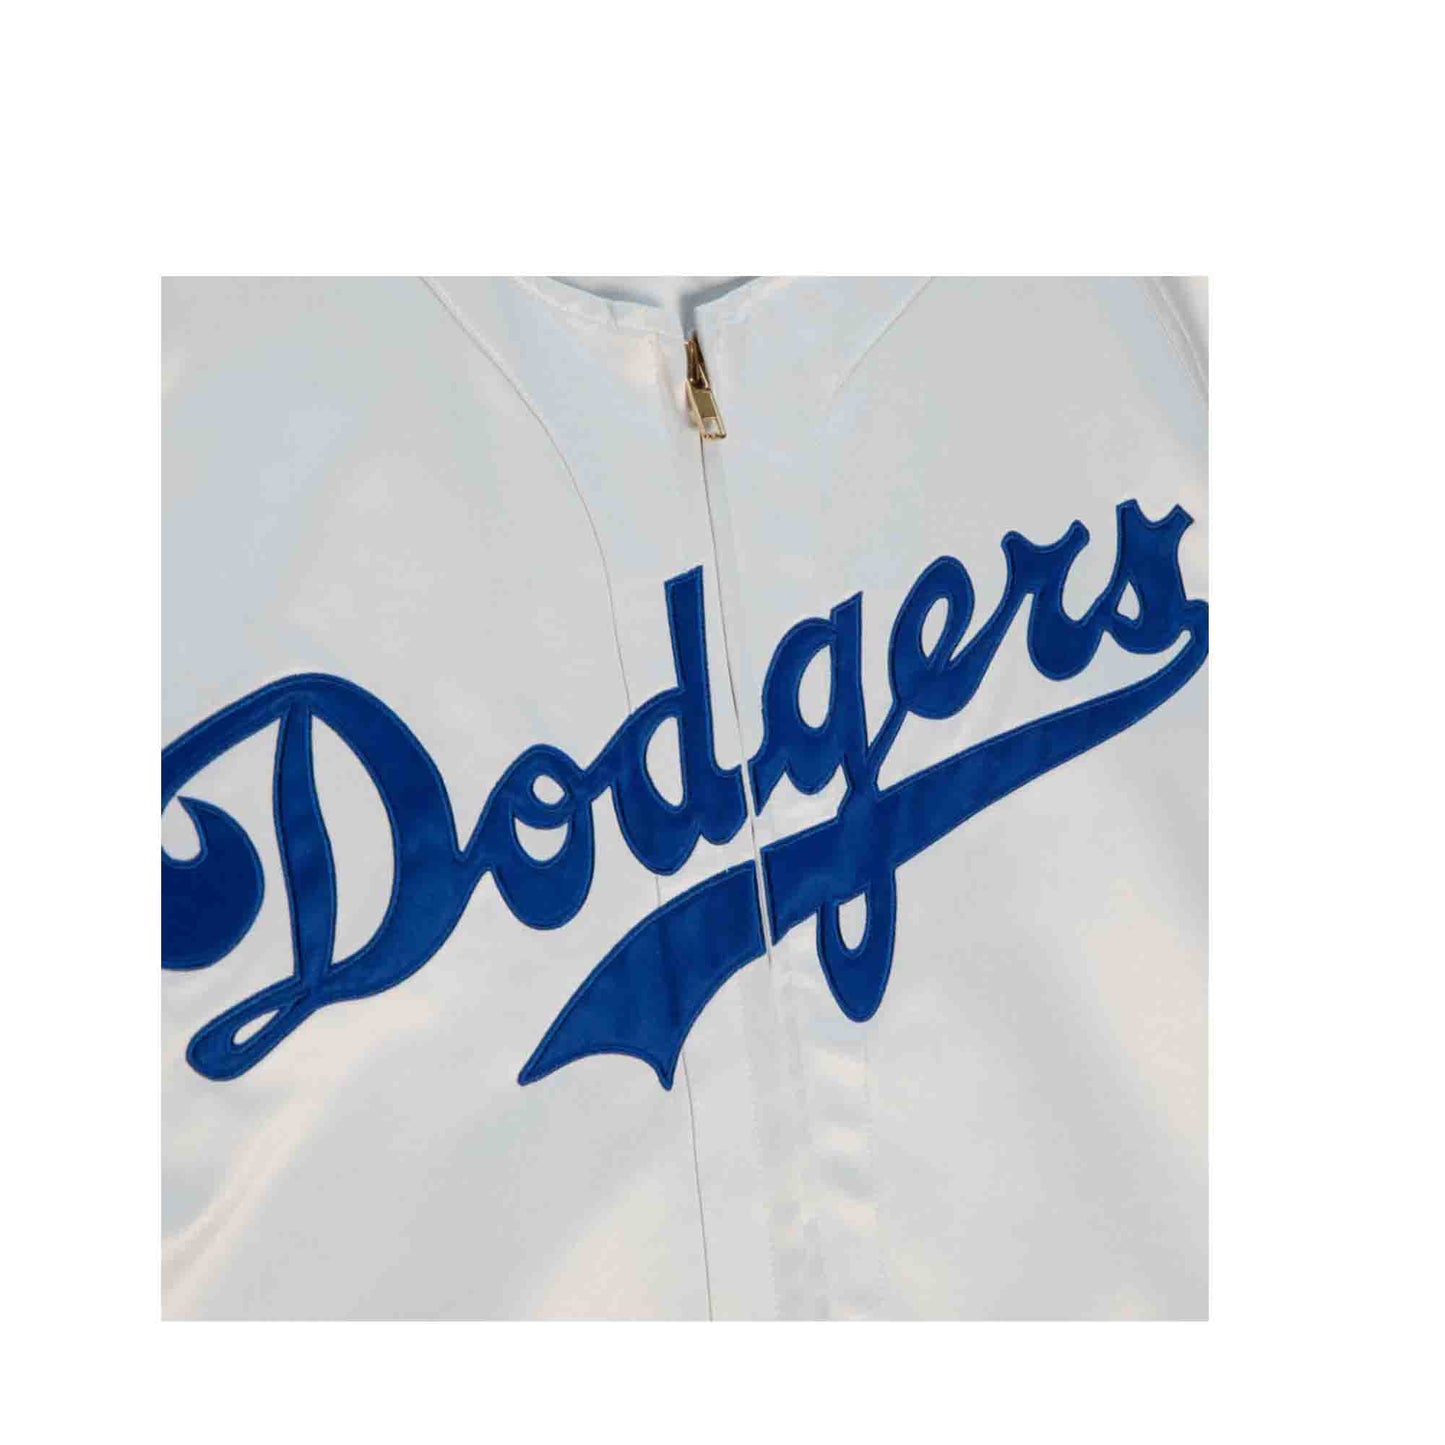 MLB Authentic Jackie Robinson Brooklyn Dodgers 1949 Jersey